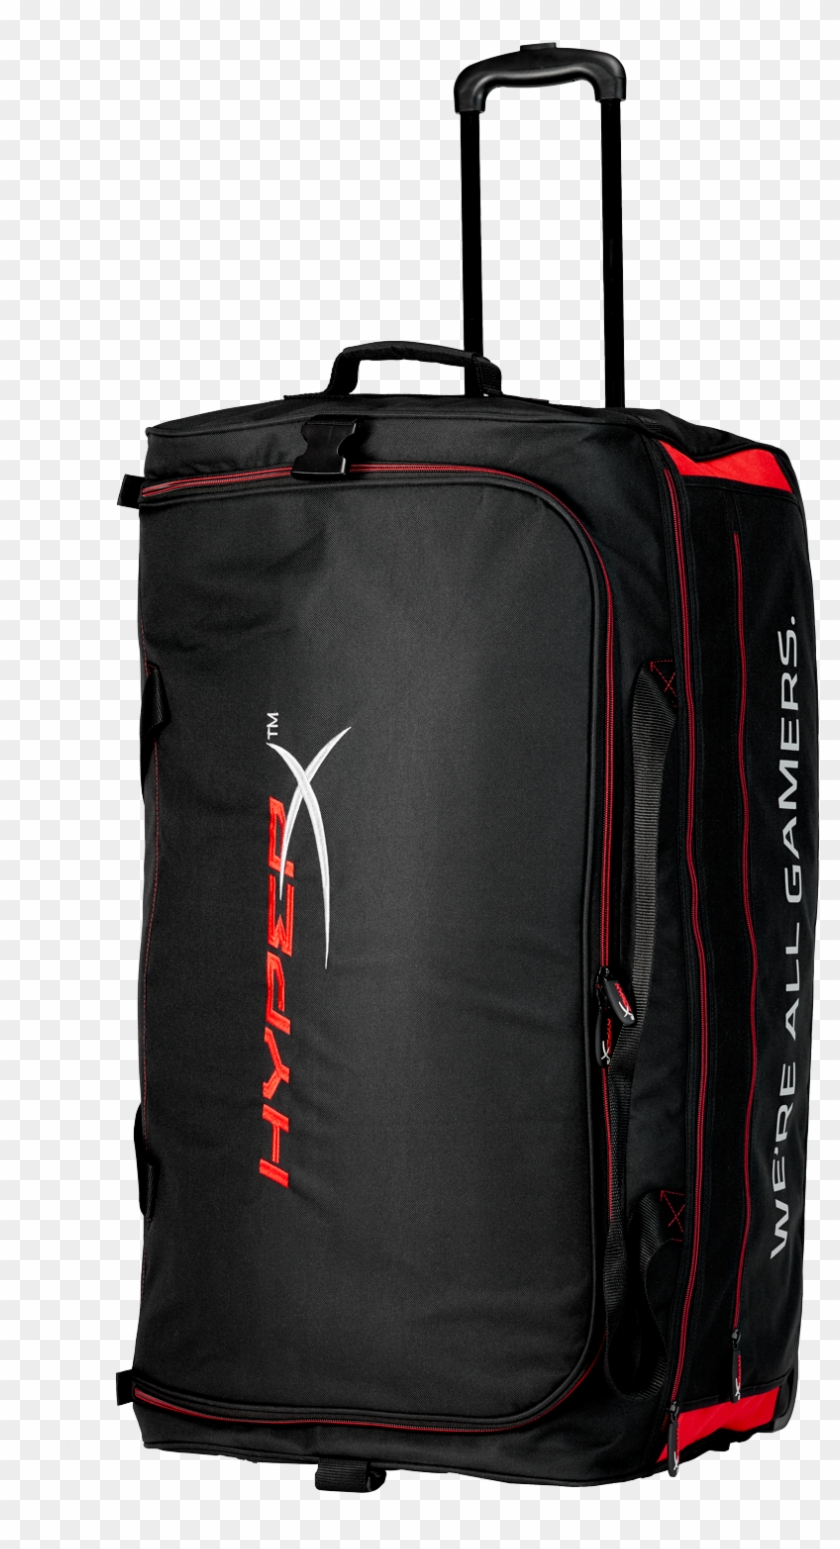 Hyperx - Event - Hyperx Carry The Ultimate Event Bag Clipart #4168129